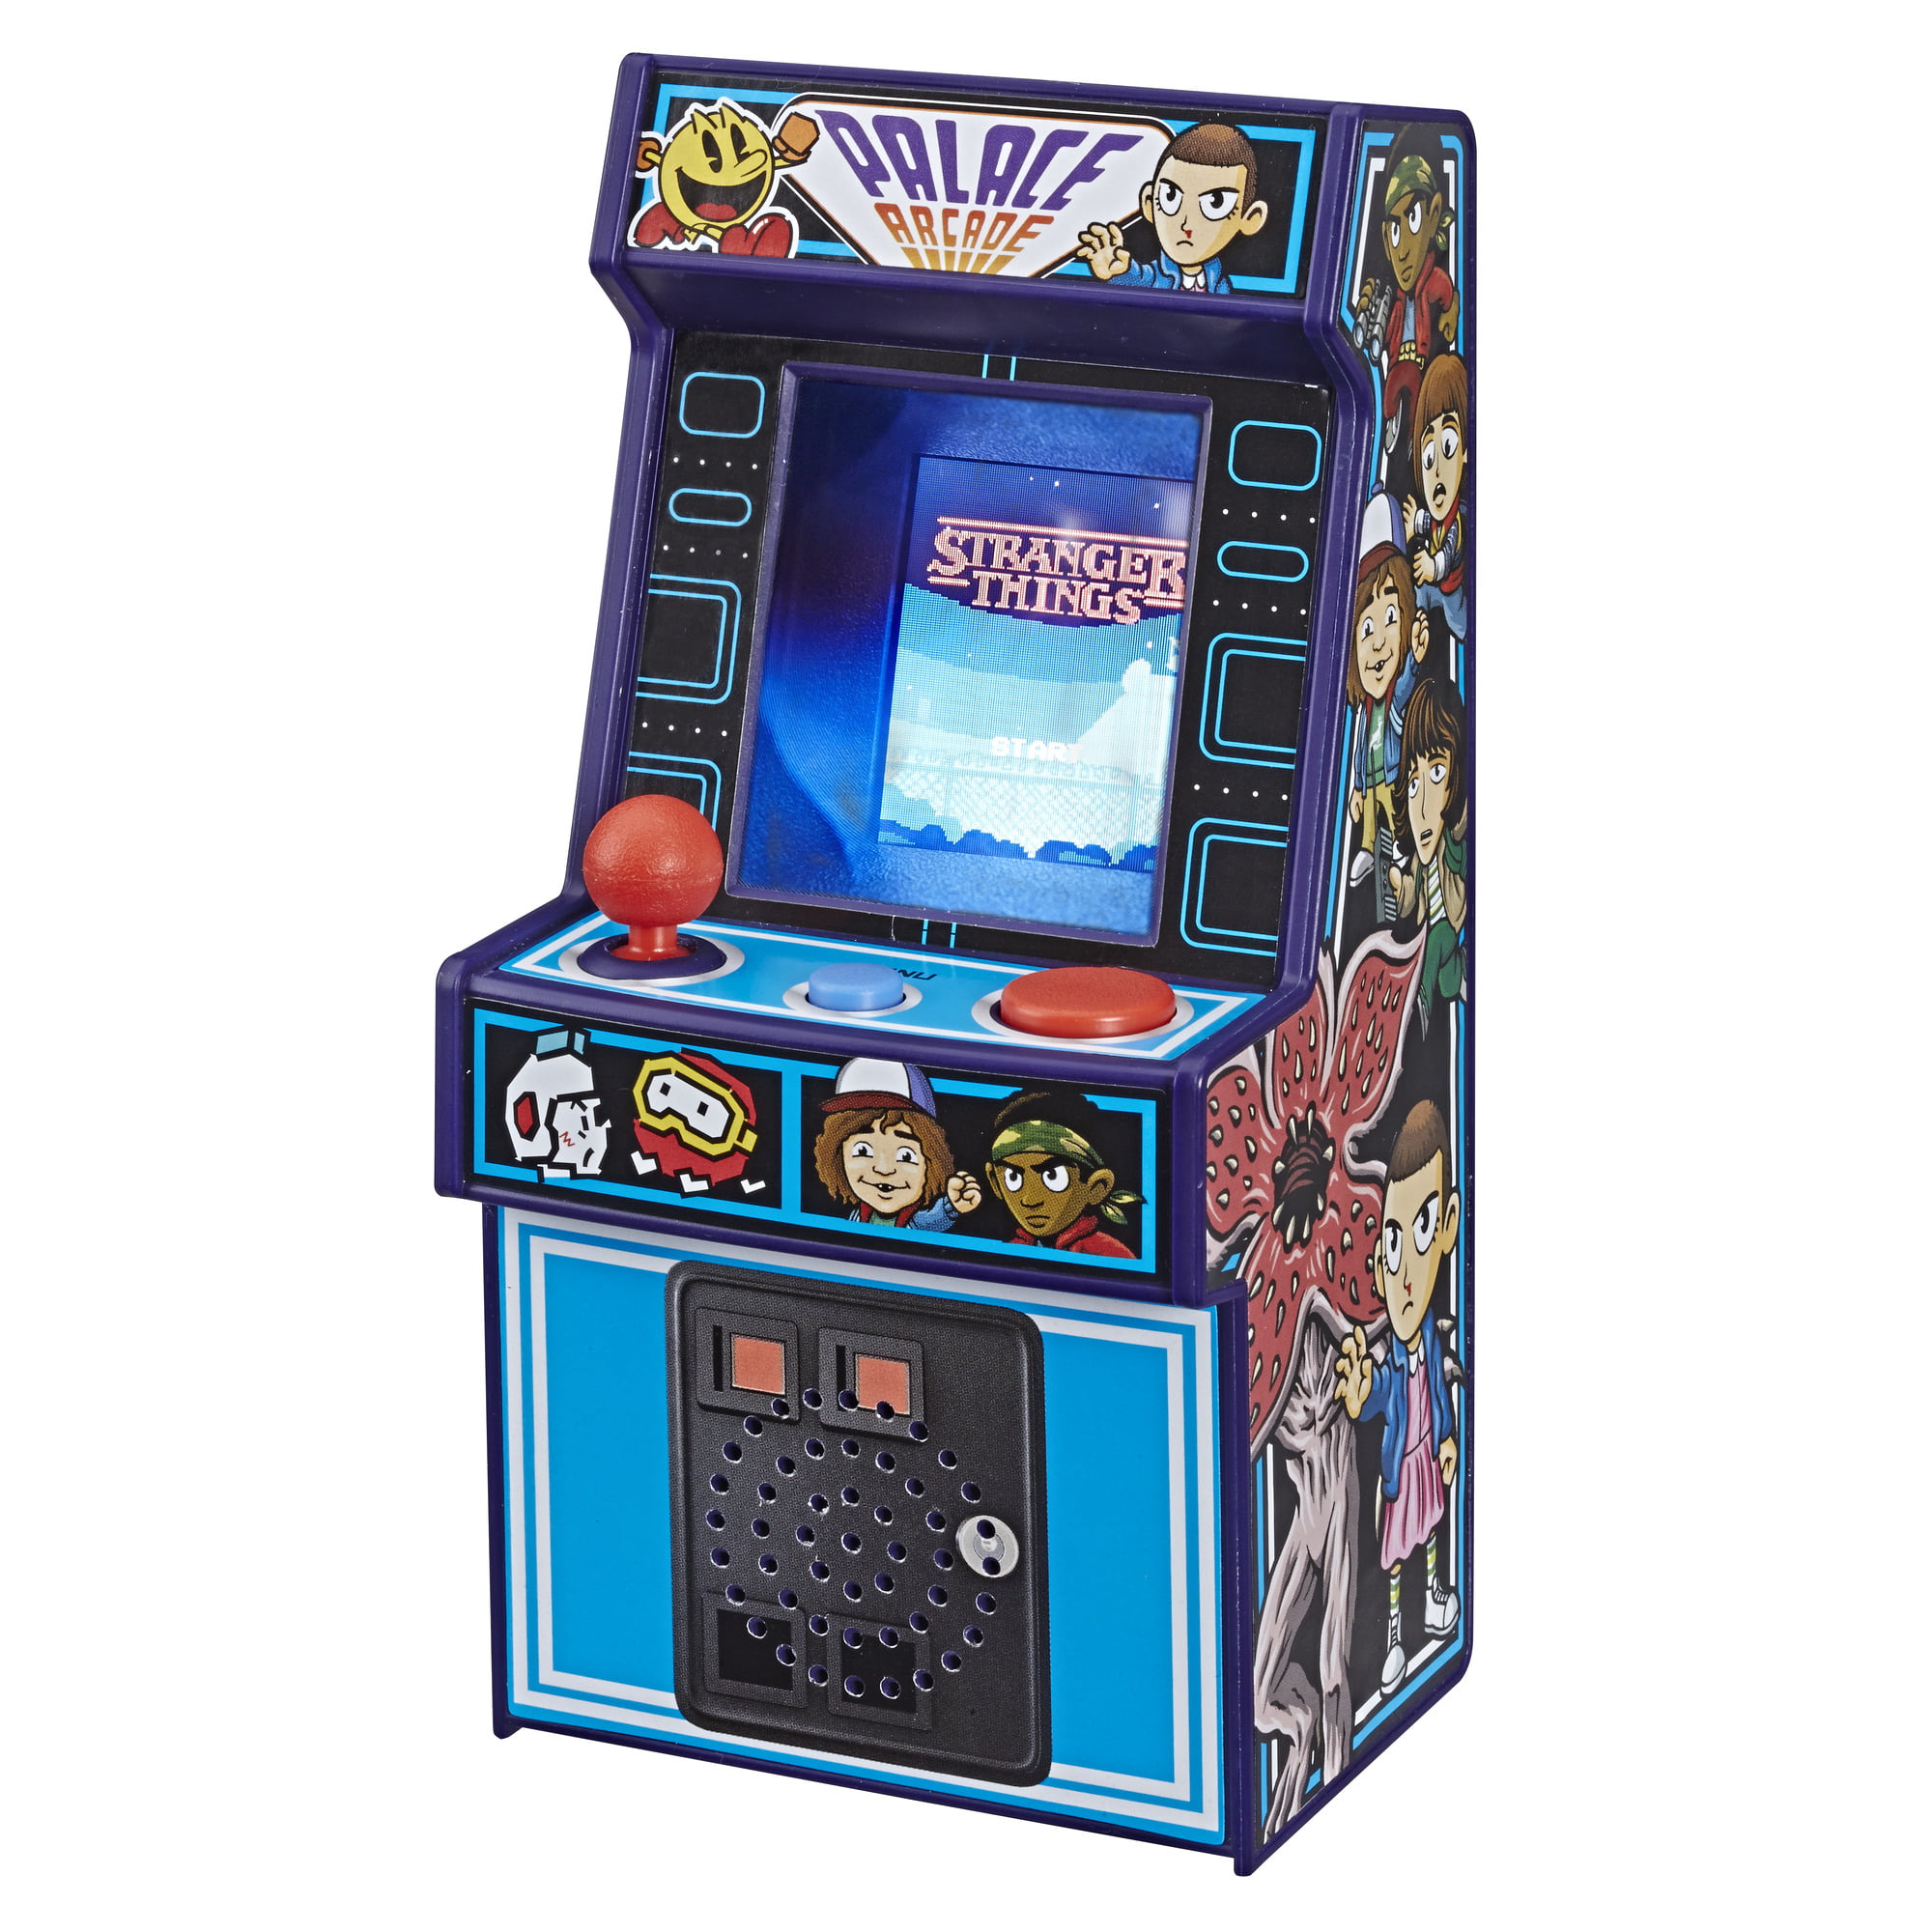 Hasbro Stranger Things Palace Arcade Handheld Electronic Game for sale online Multicoloured E5640 